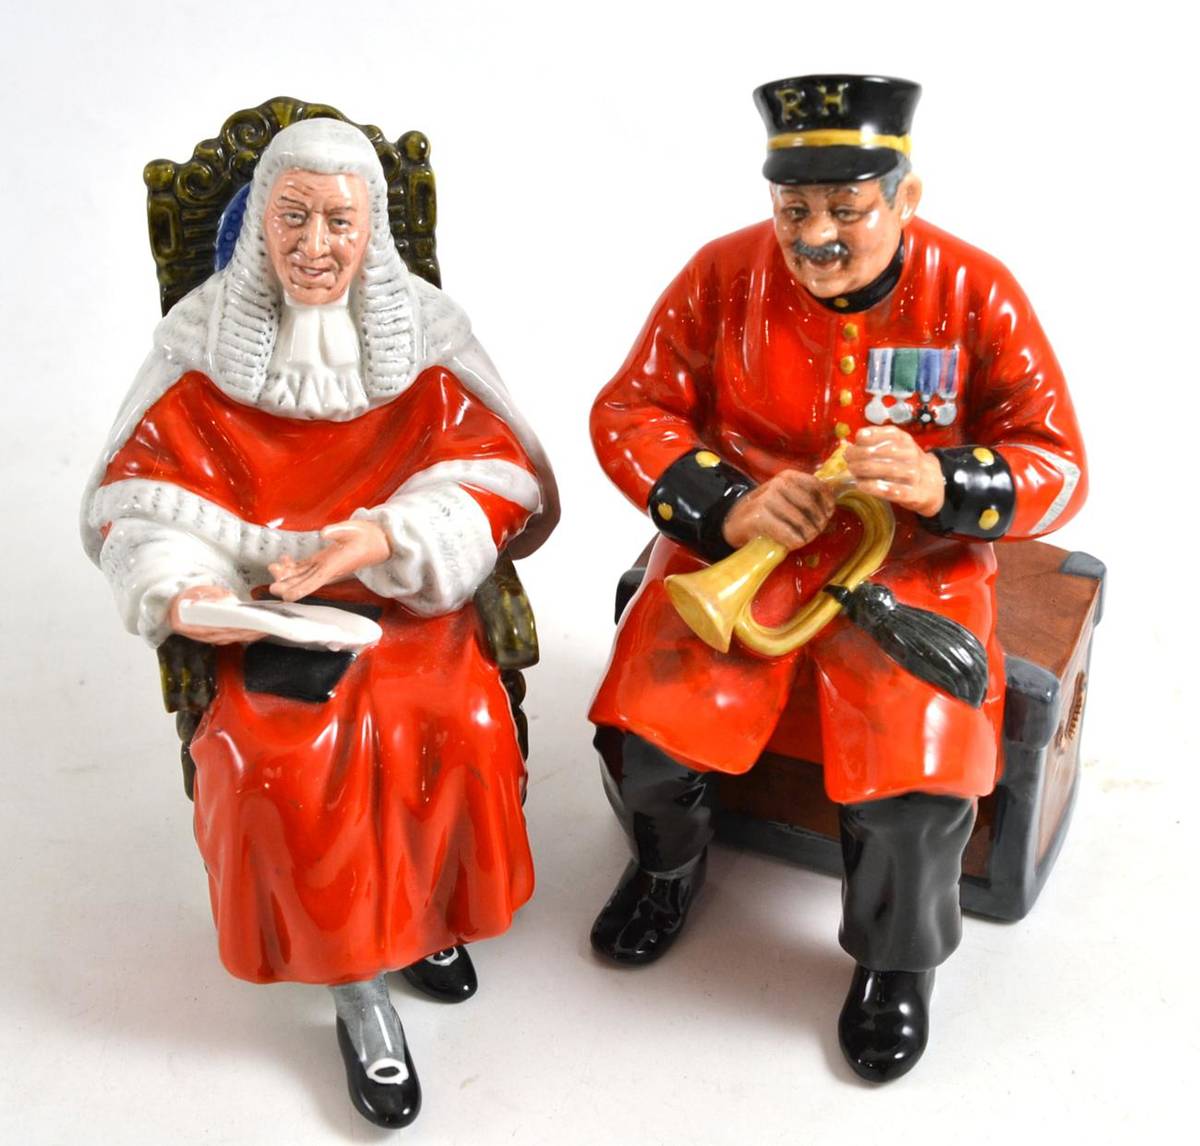 Lot 98 - Two Royal Doulton figures - 'The Judge' and 'Past Glory'